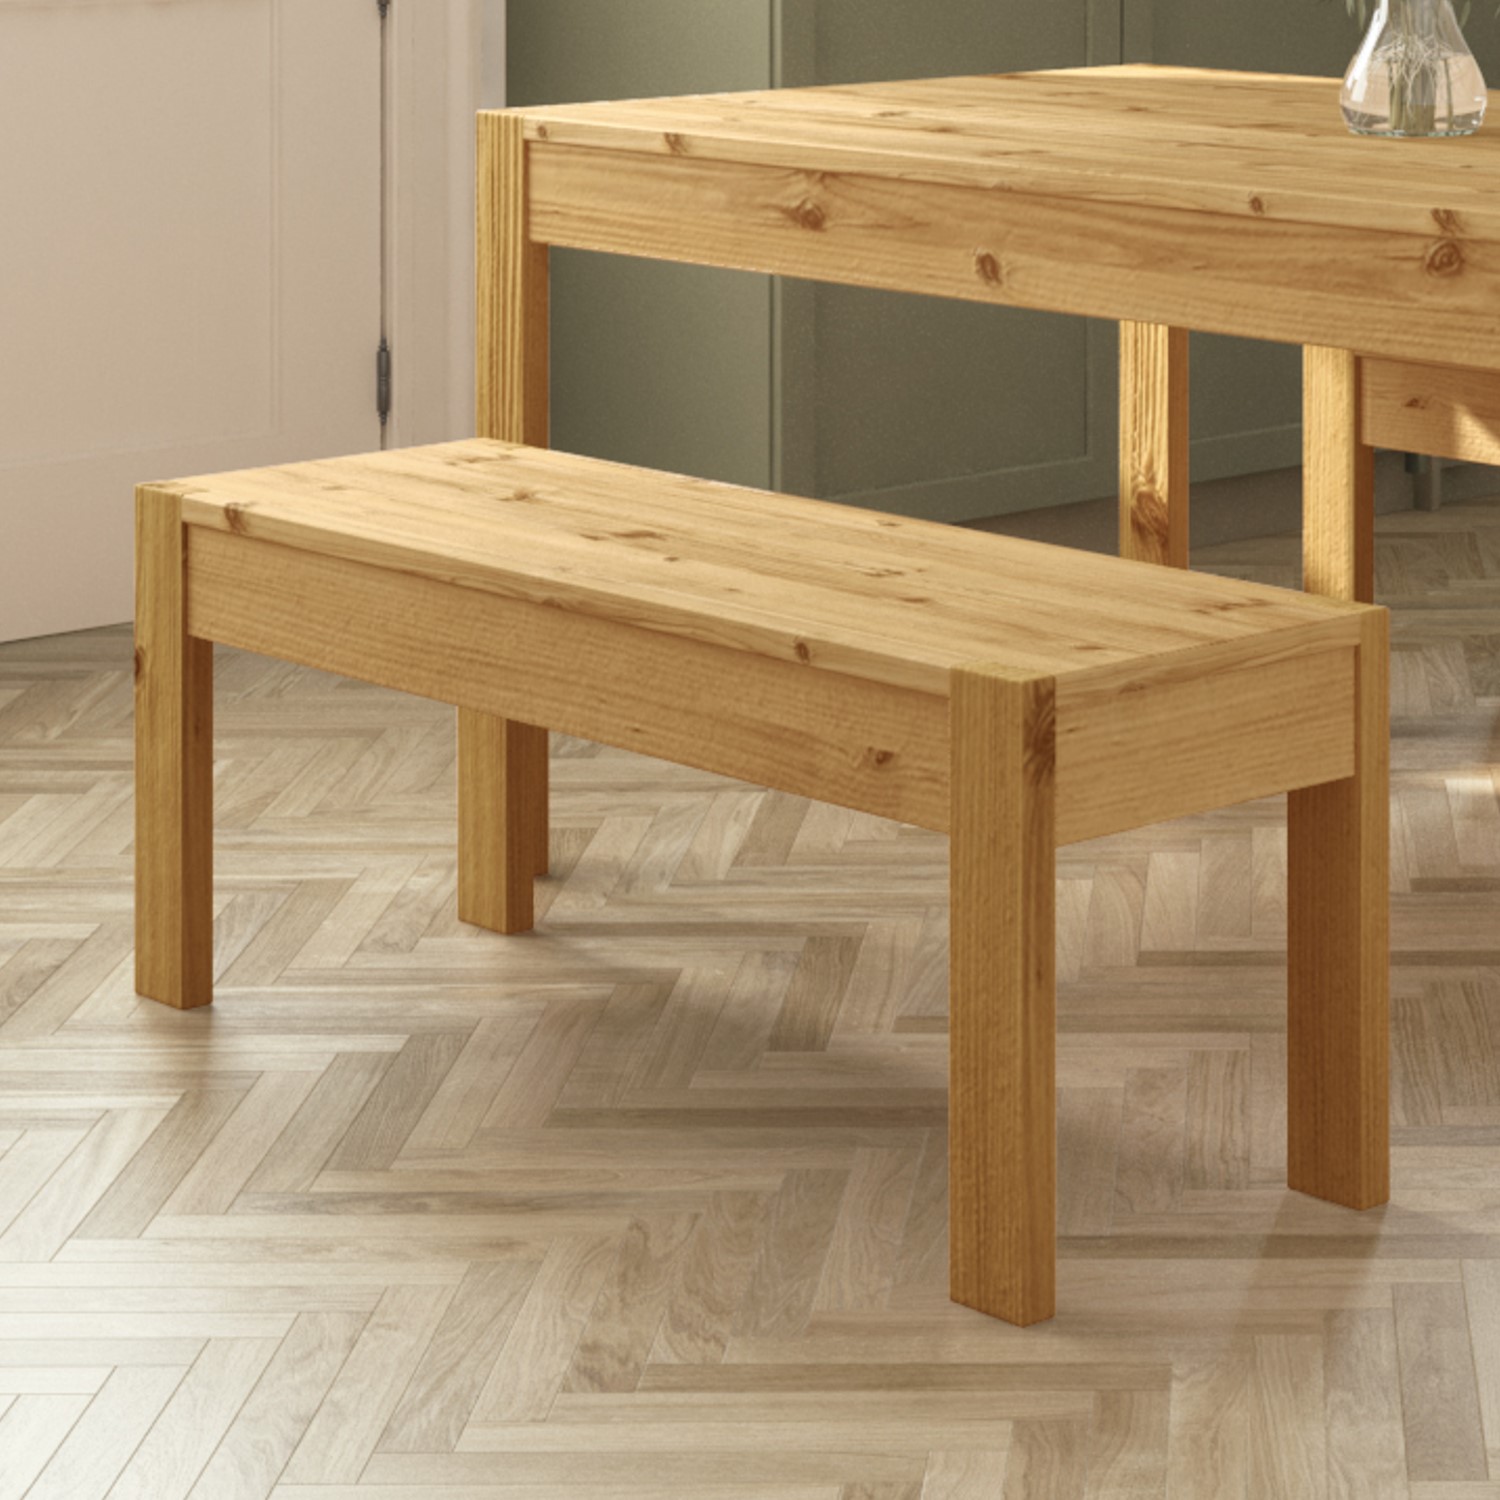 Photo of Wooden dining bench in solid pine - seats 2 - emerson